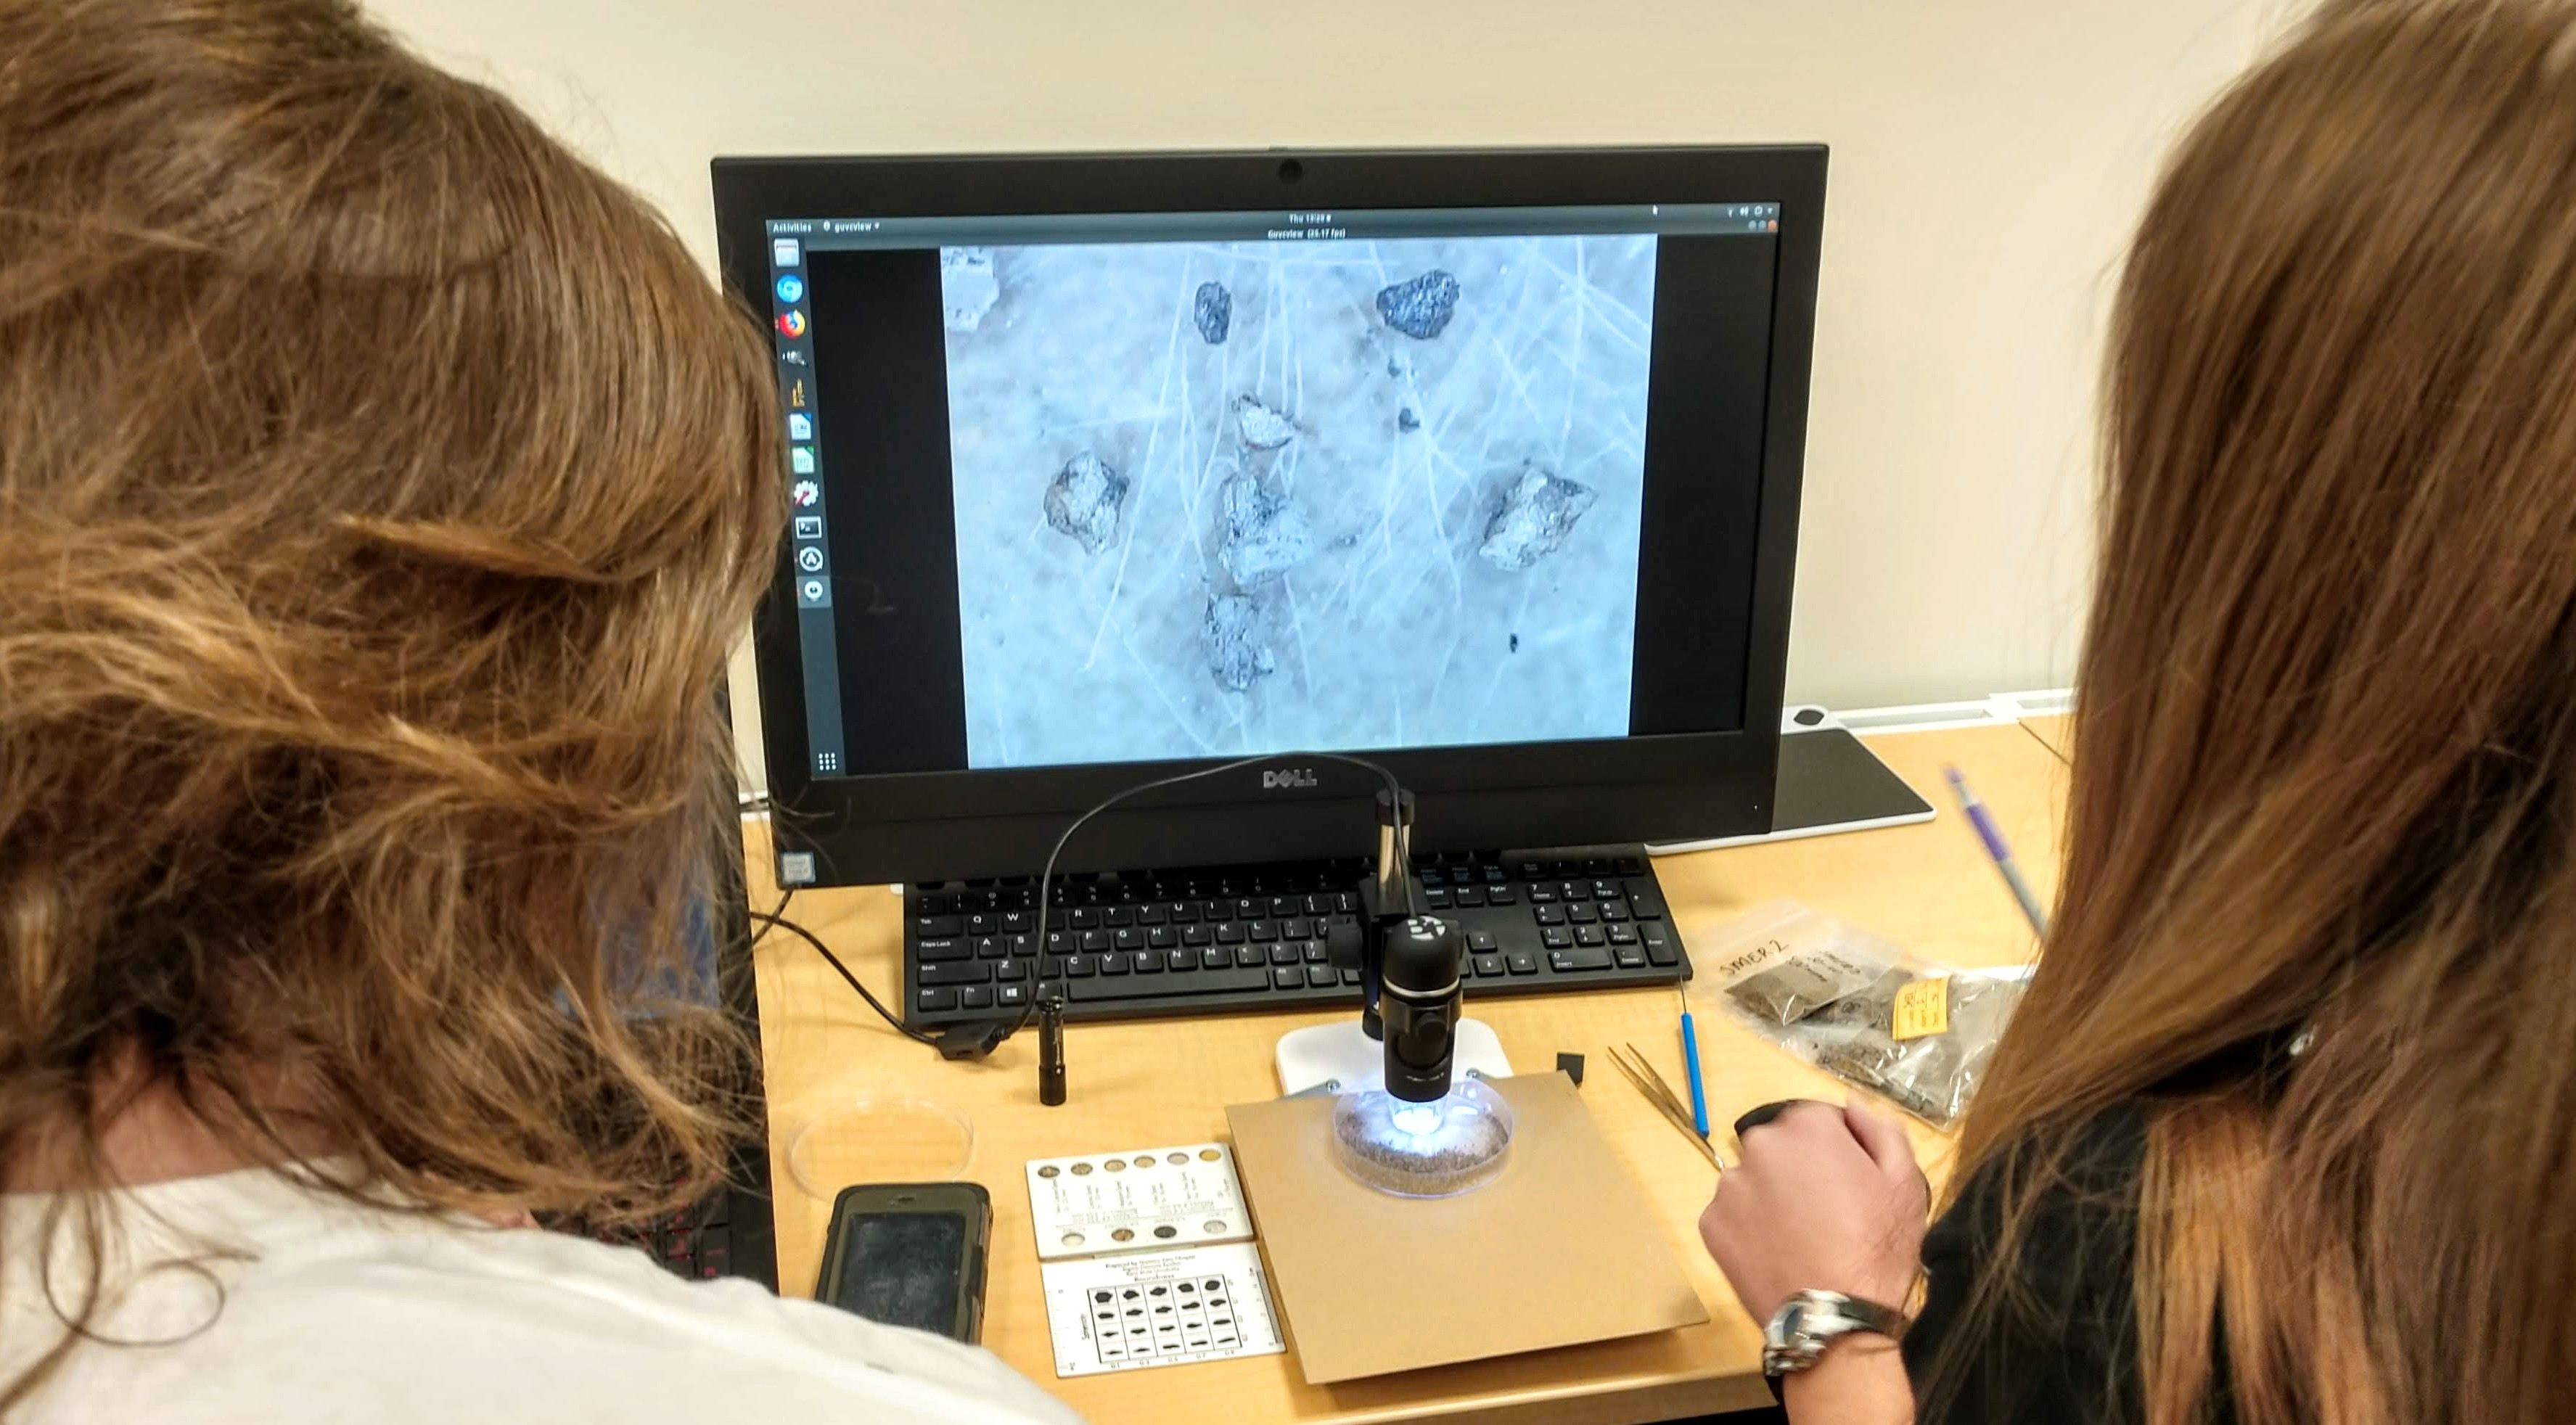 Students using low-power microscopy to analyze sediment particle shapes in the Computational Archaeology Laboratory.